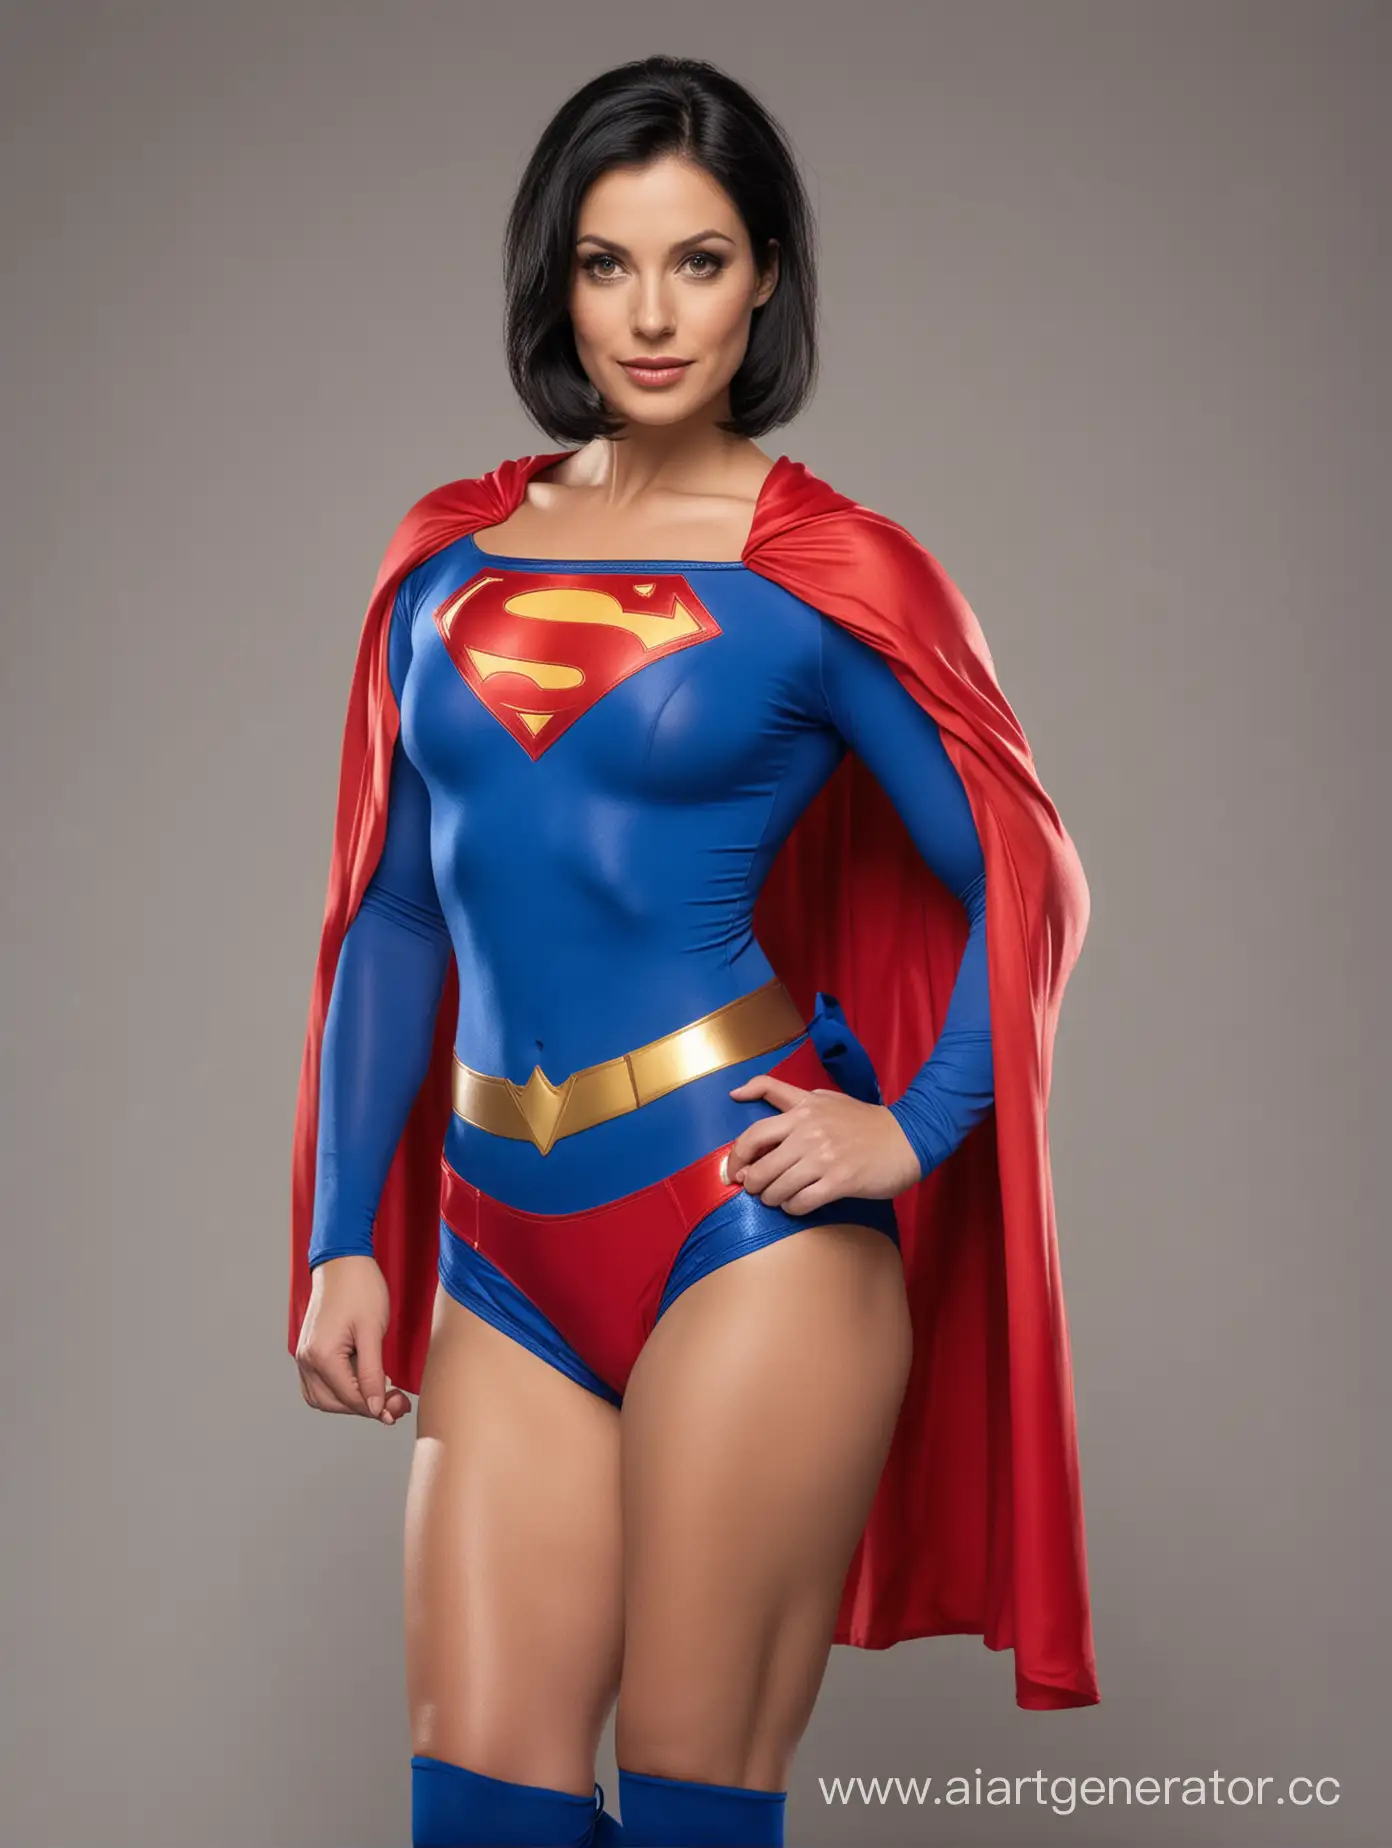 A pretty woman with black hair, age 30, she is confident and proud, her body is very muscular, she is wearing the classic Superwoman costume, bright blue spandex tights, red briefs, red cape